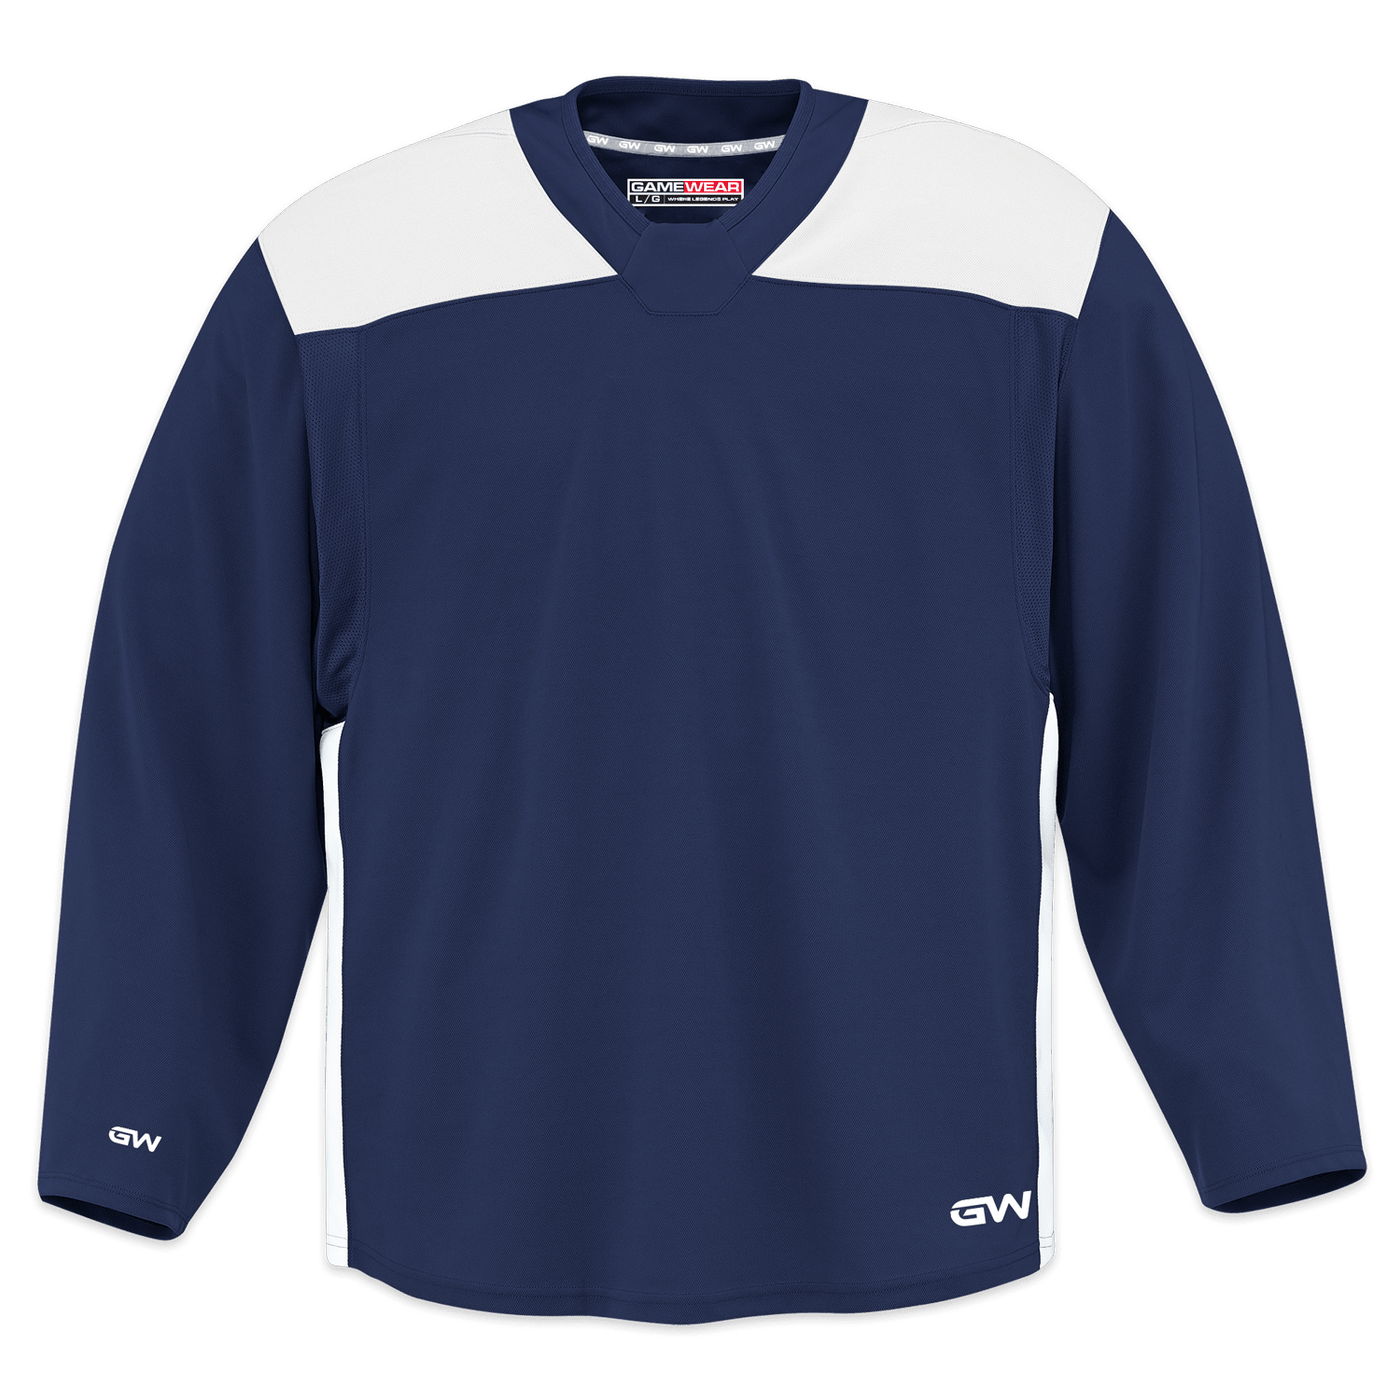 GameWear GW6500 ProLite Series Junior Hockey Practice Jersey - Royal / White - The Hockey Shop Source For Sports